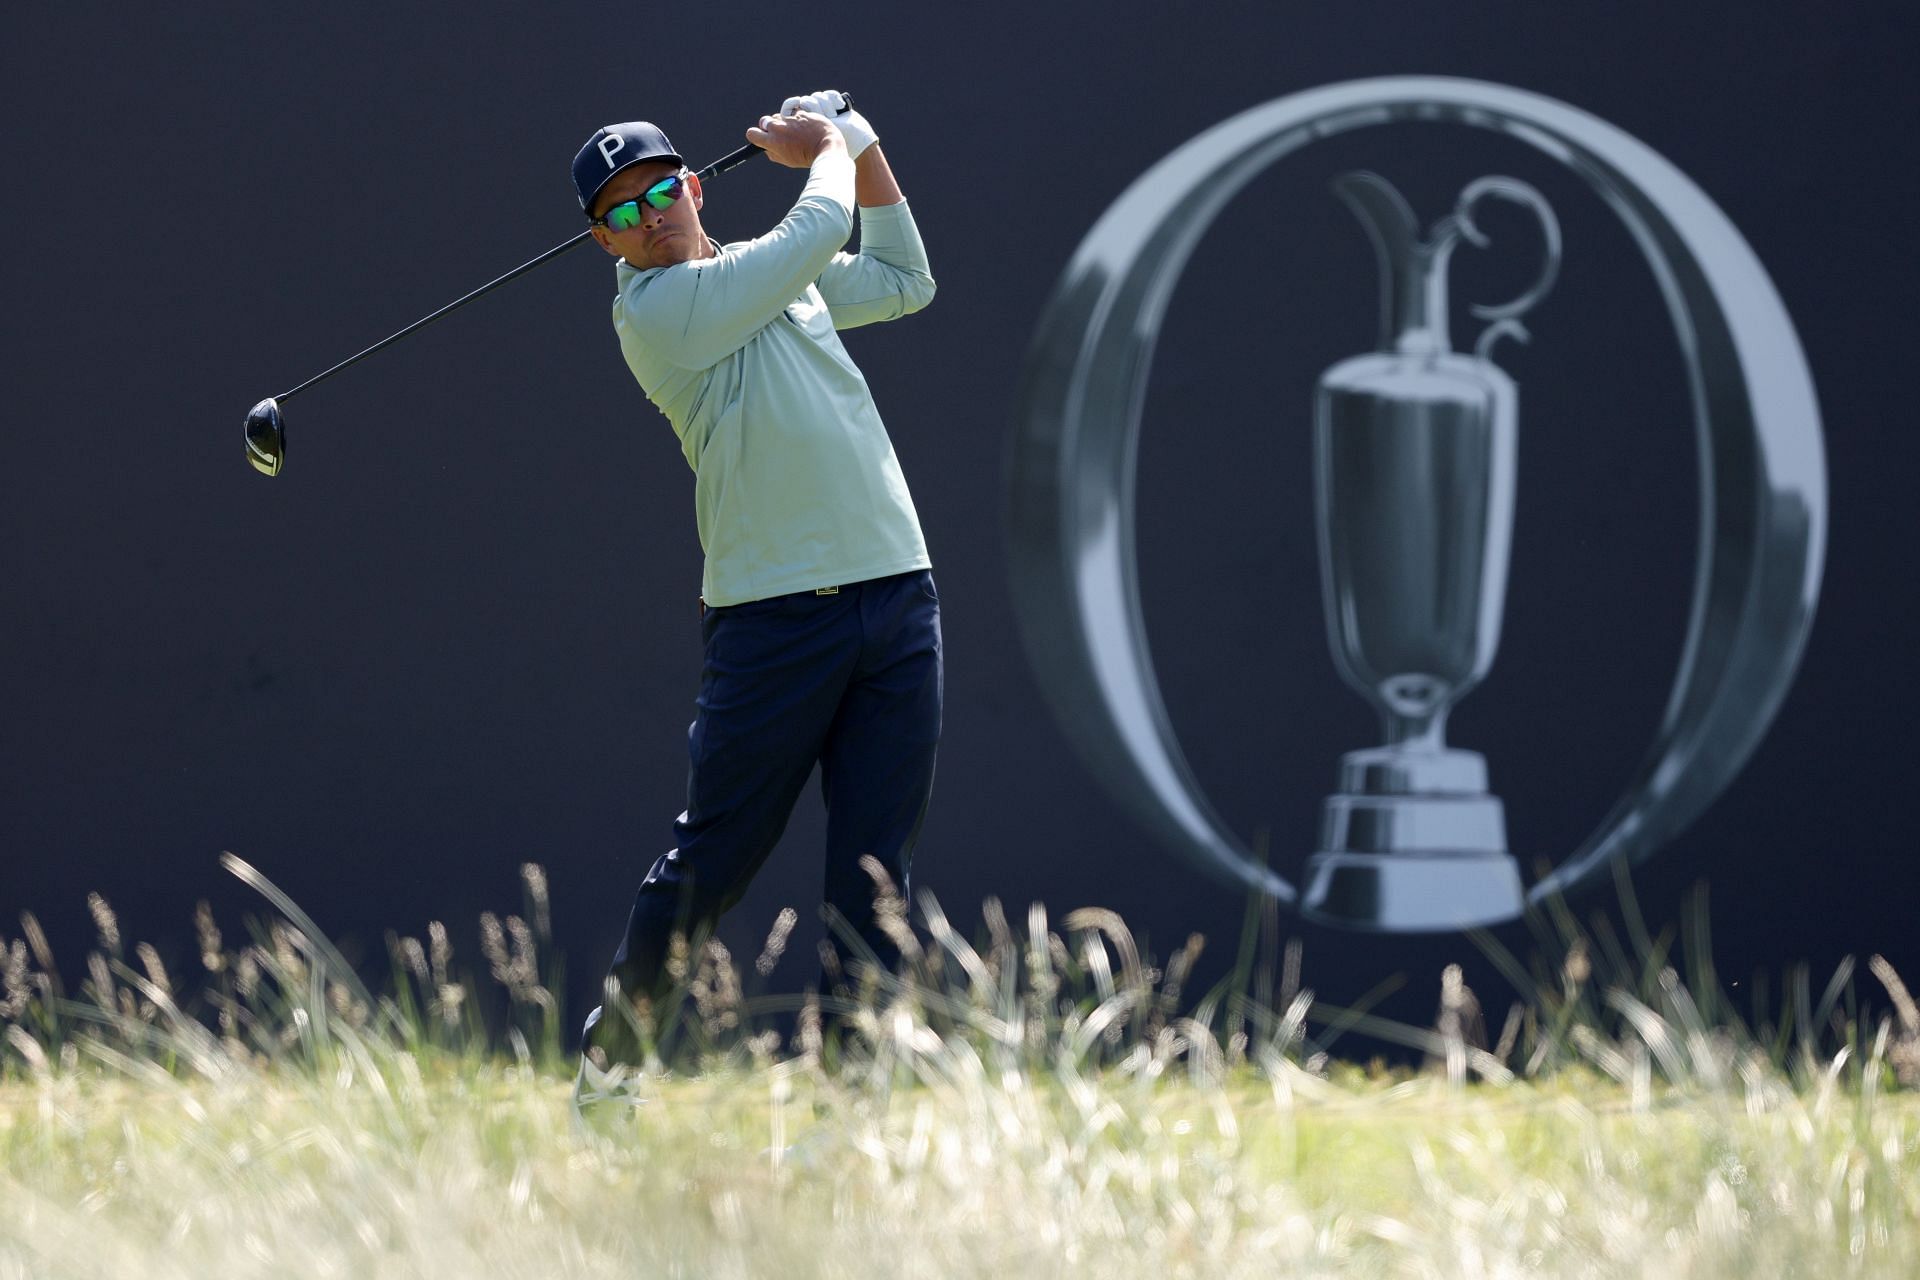 Rickie Fowler at The 151st Open Championship - Day One (Image via Getty).